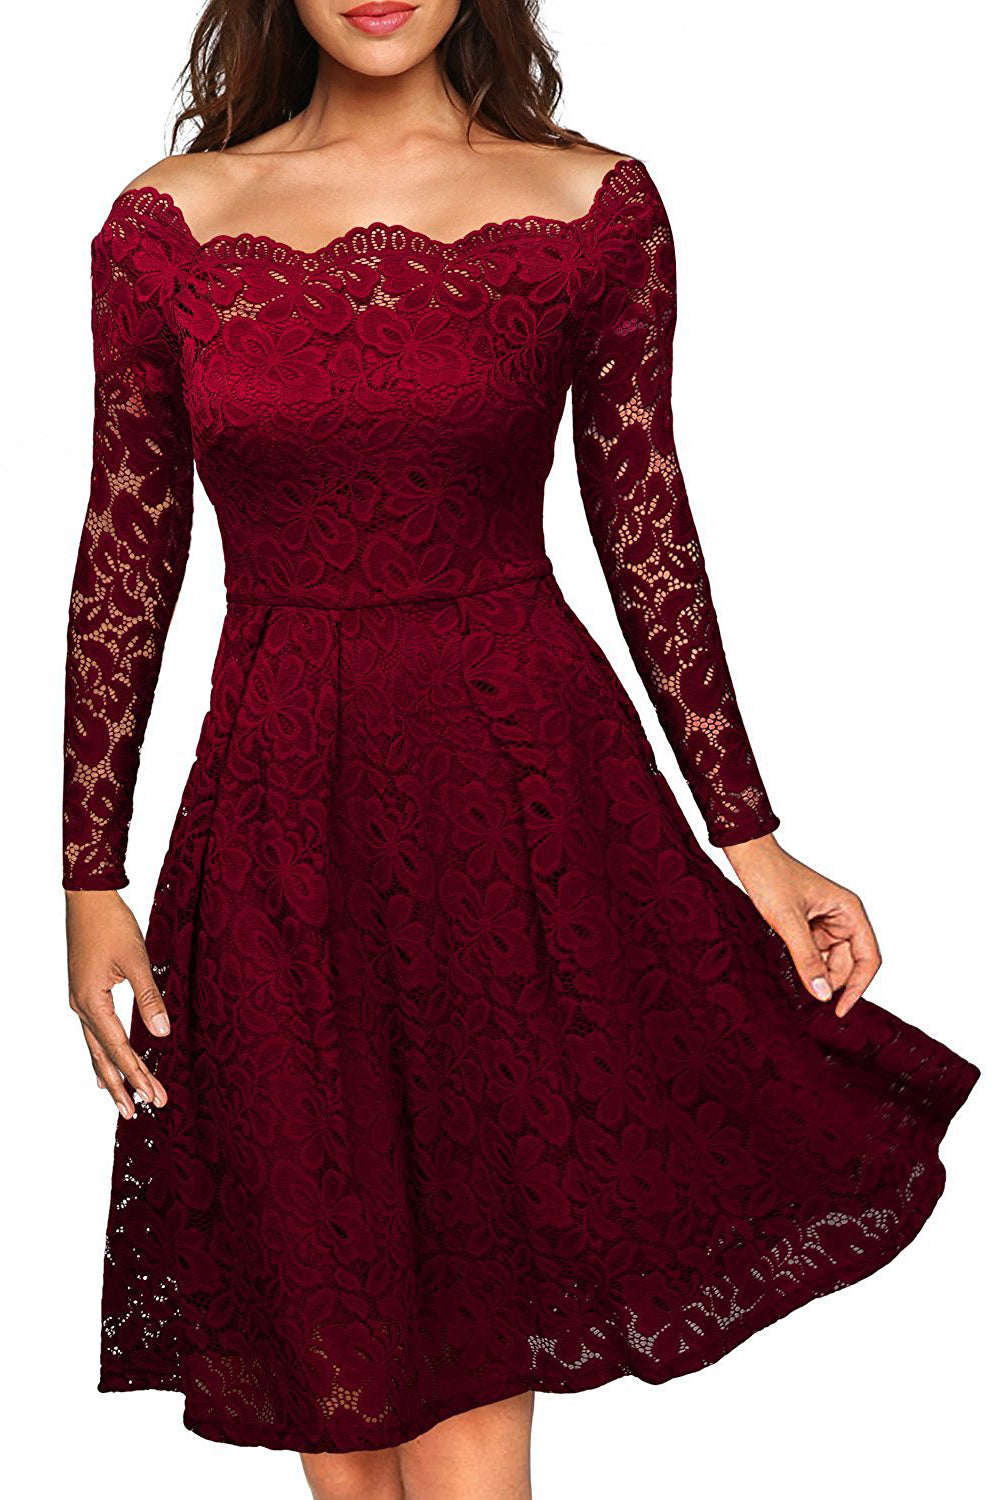 Wine Plus Size Scalloped Off Shoulder Flared Lace Dress